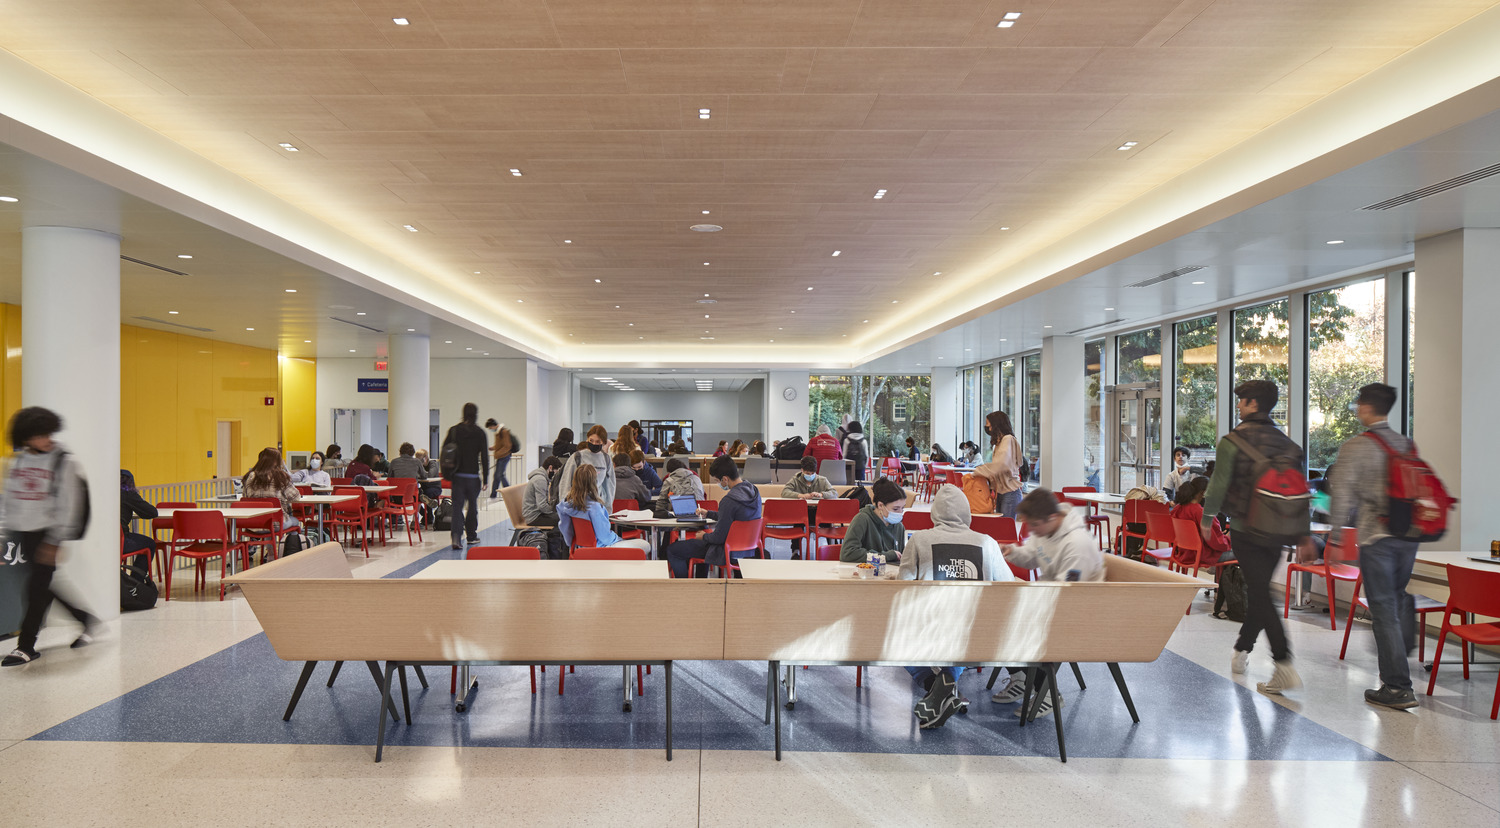 Architectural lighting at Brookline High School Campus Expansion